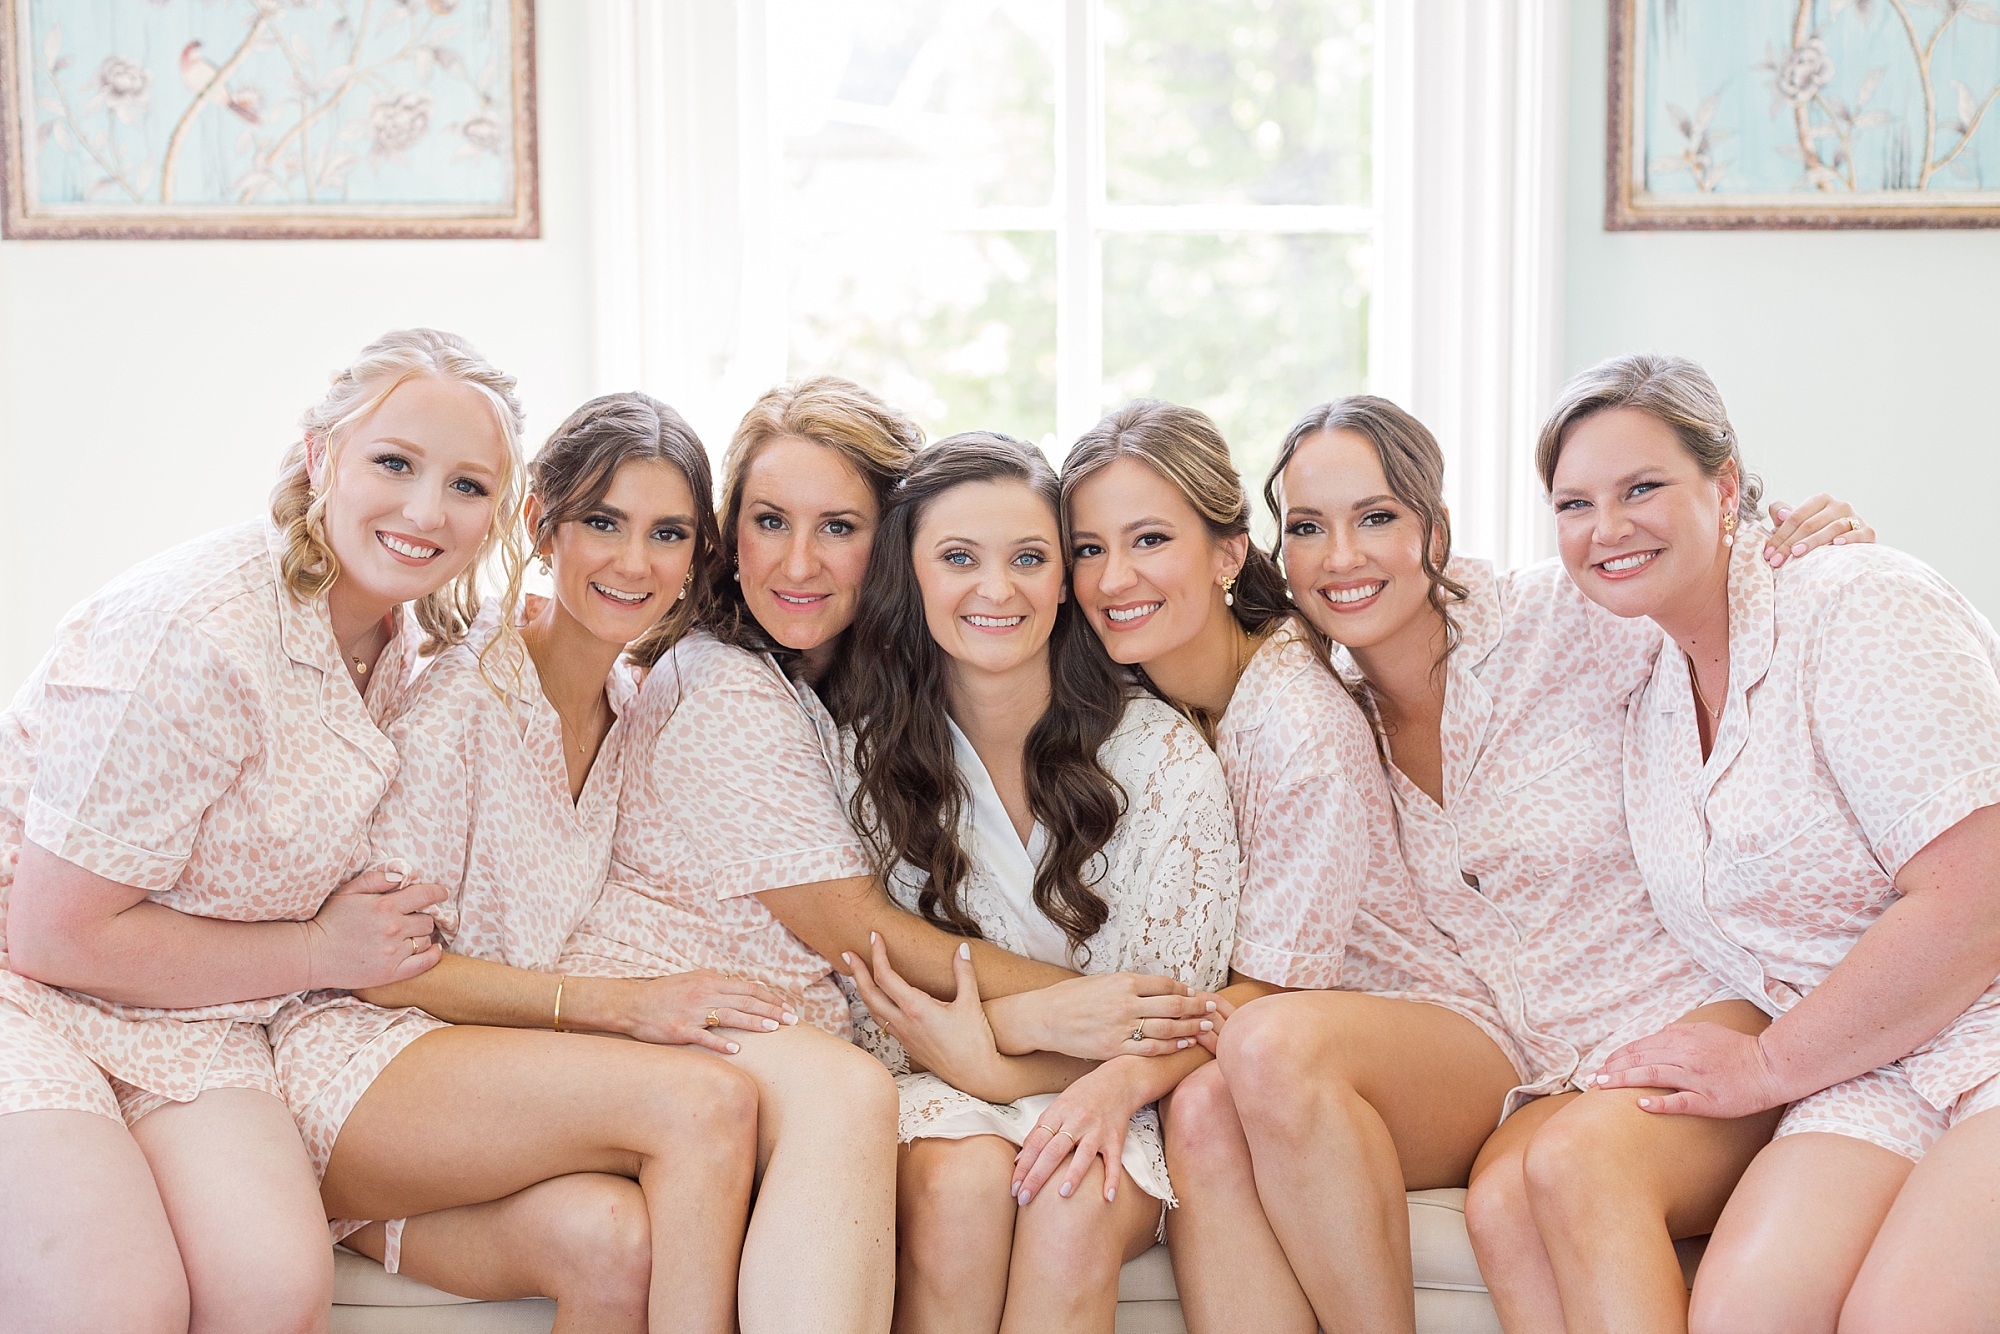 Bridal party matching pink pajamas for getting ready | Merrimon Wynne Wedding | Sarah Hinckley Photography | Raleigh NC Wedding Photographer